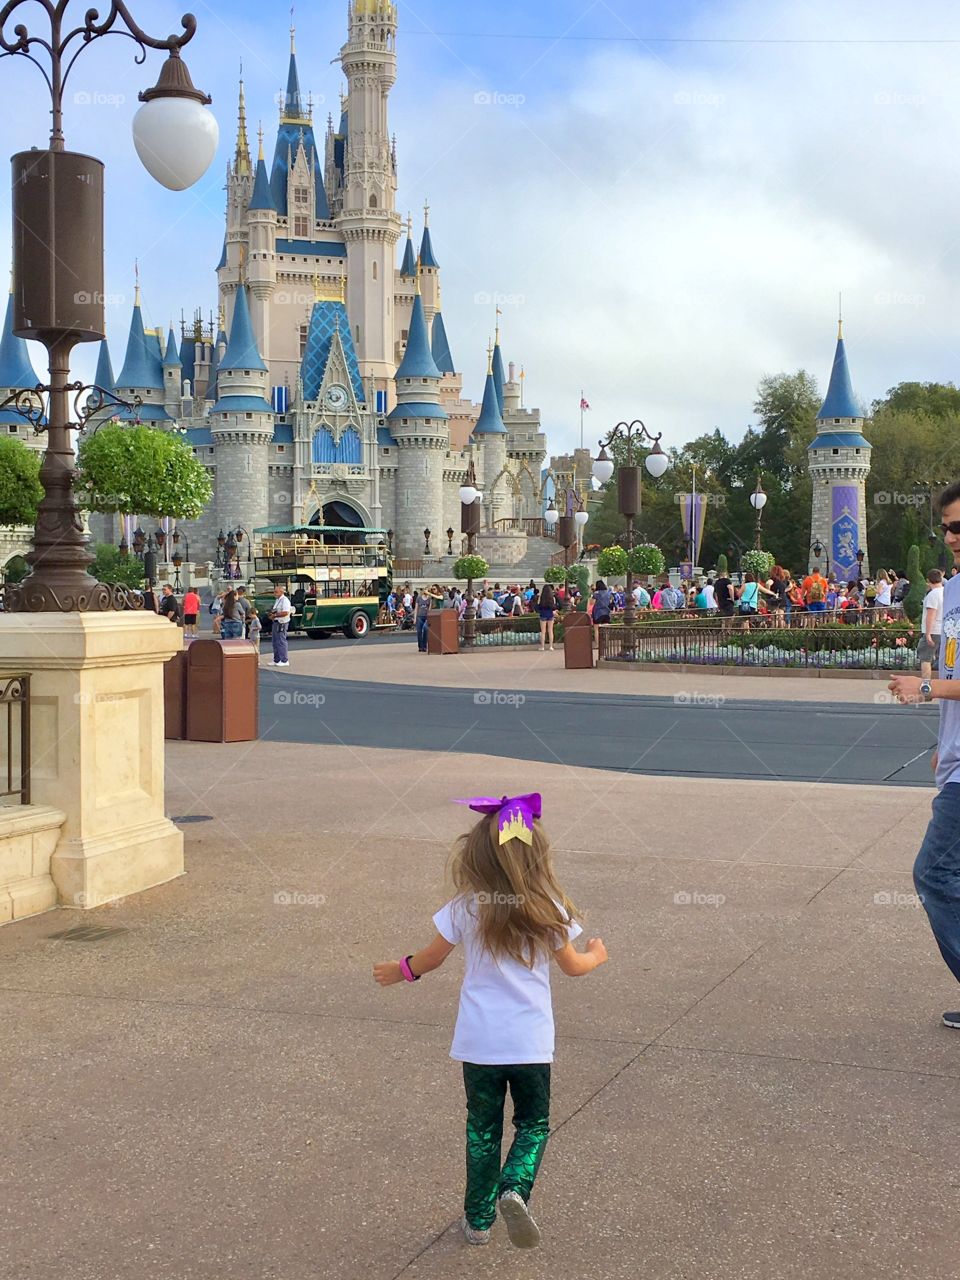 When she say Cinderella's castle for the first time she ran as fast as she could to it. 